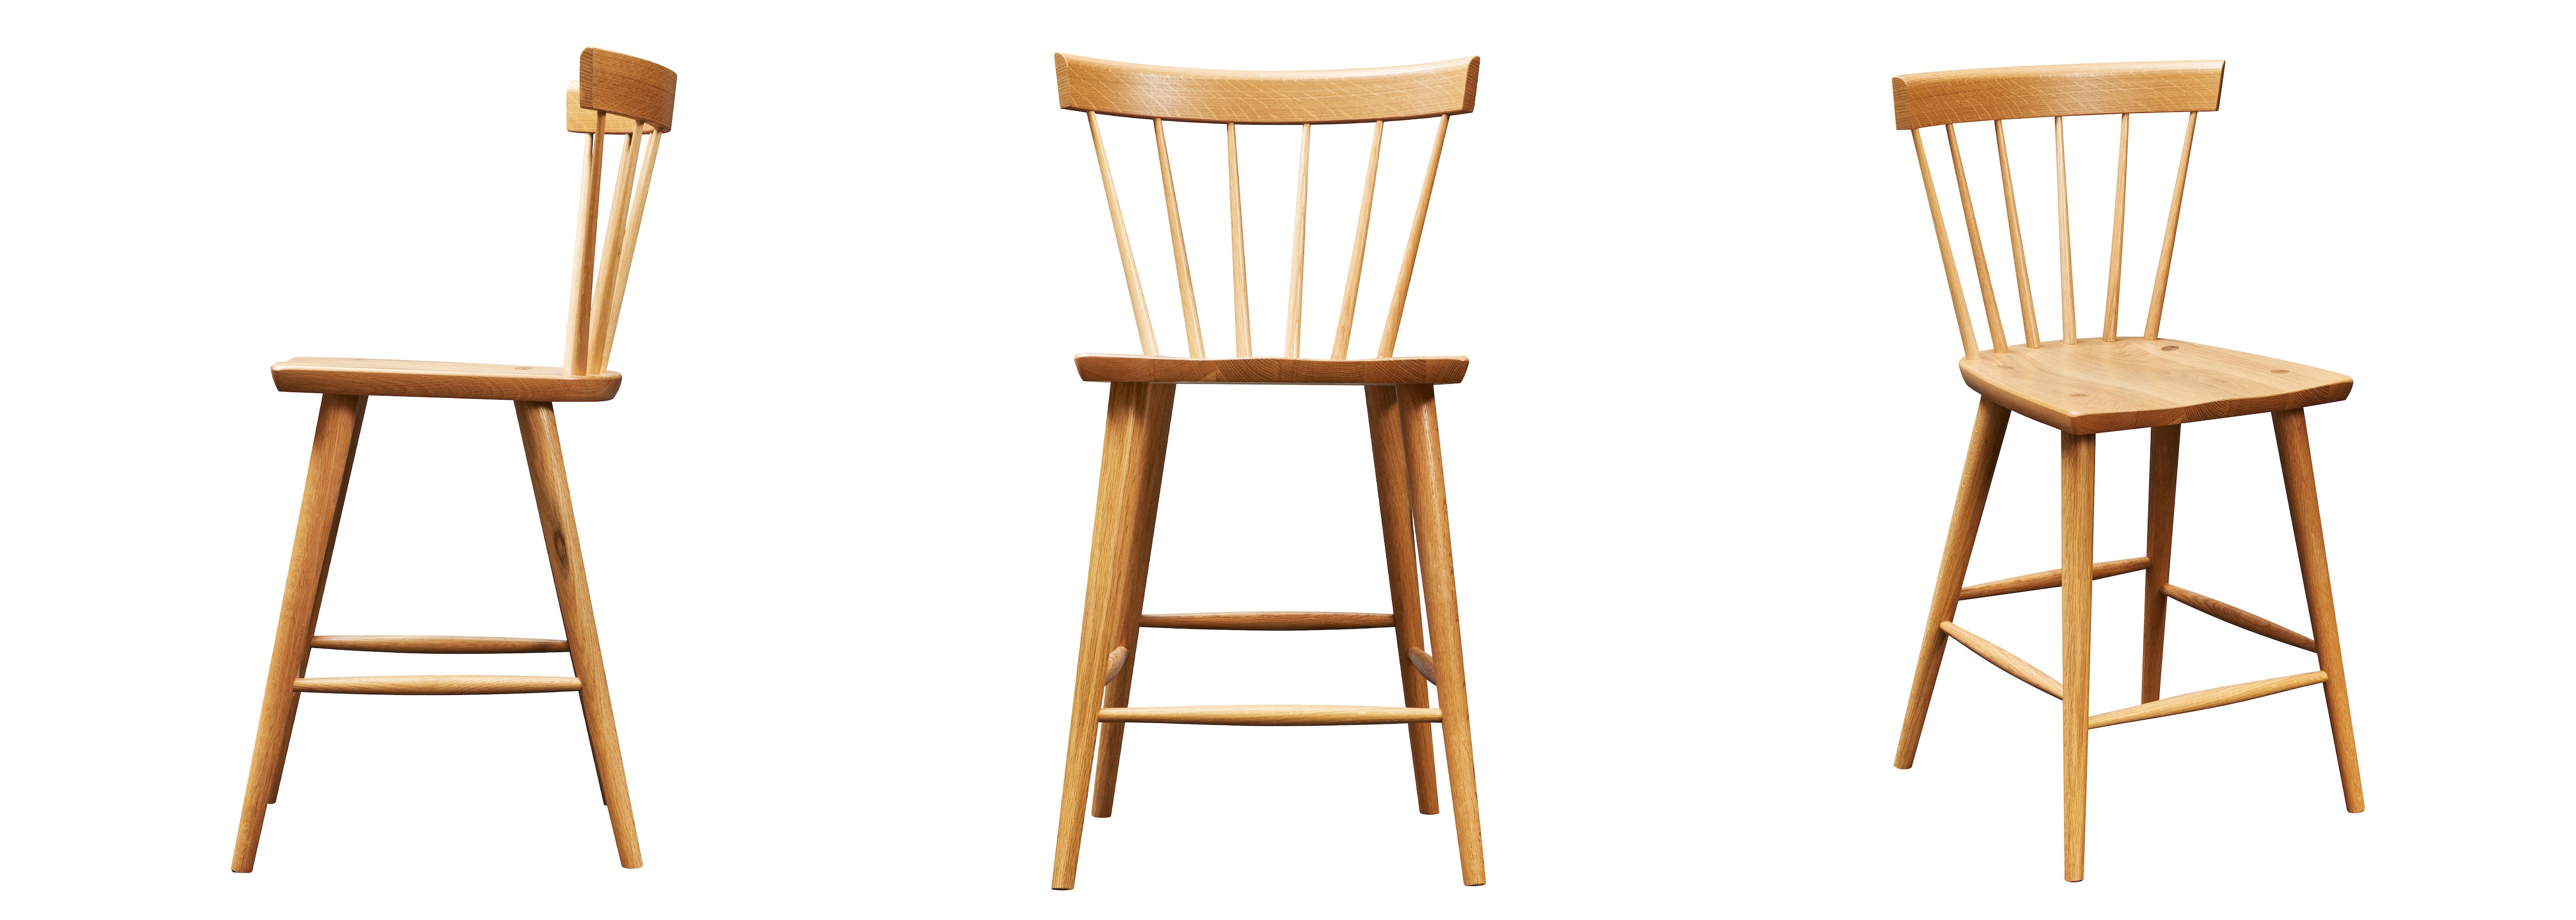 Three view spread of a white oak Boston Stool  shown from the side, front and corner